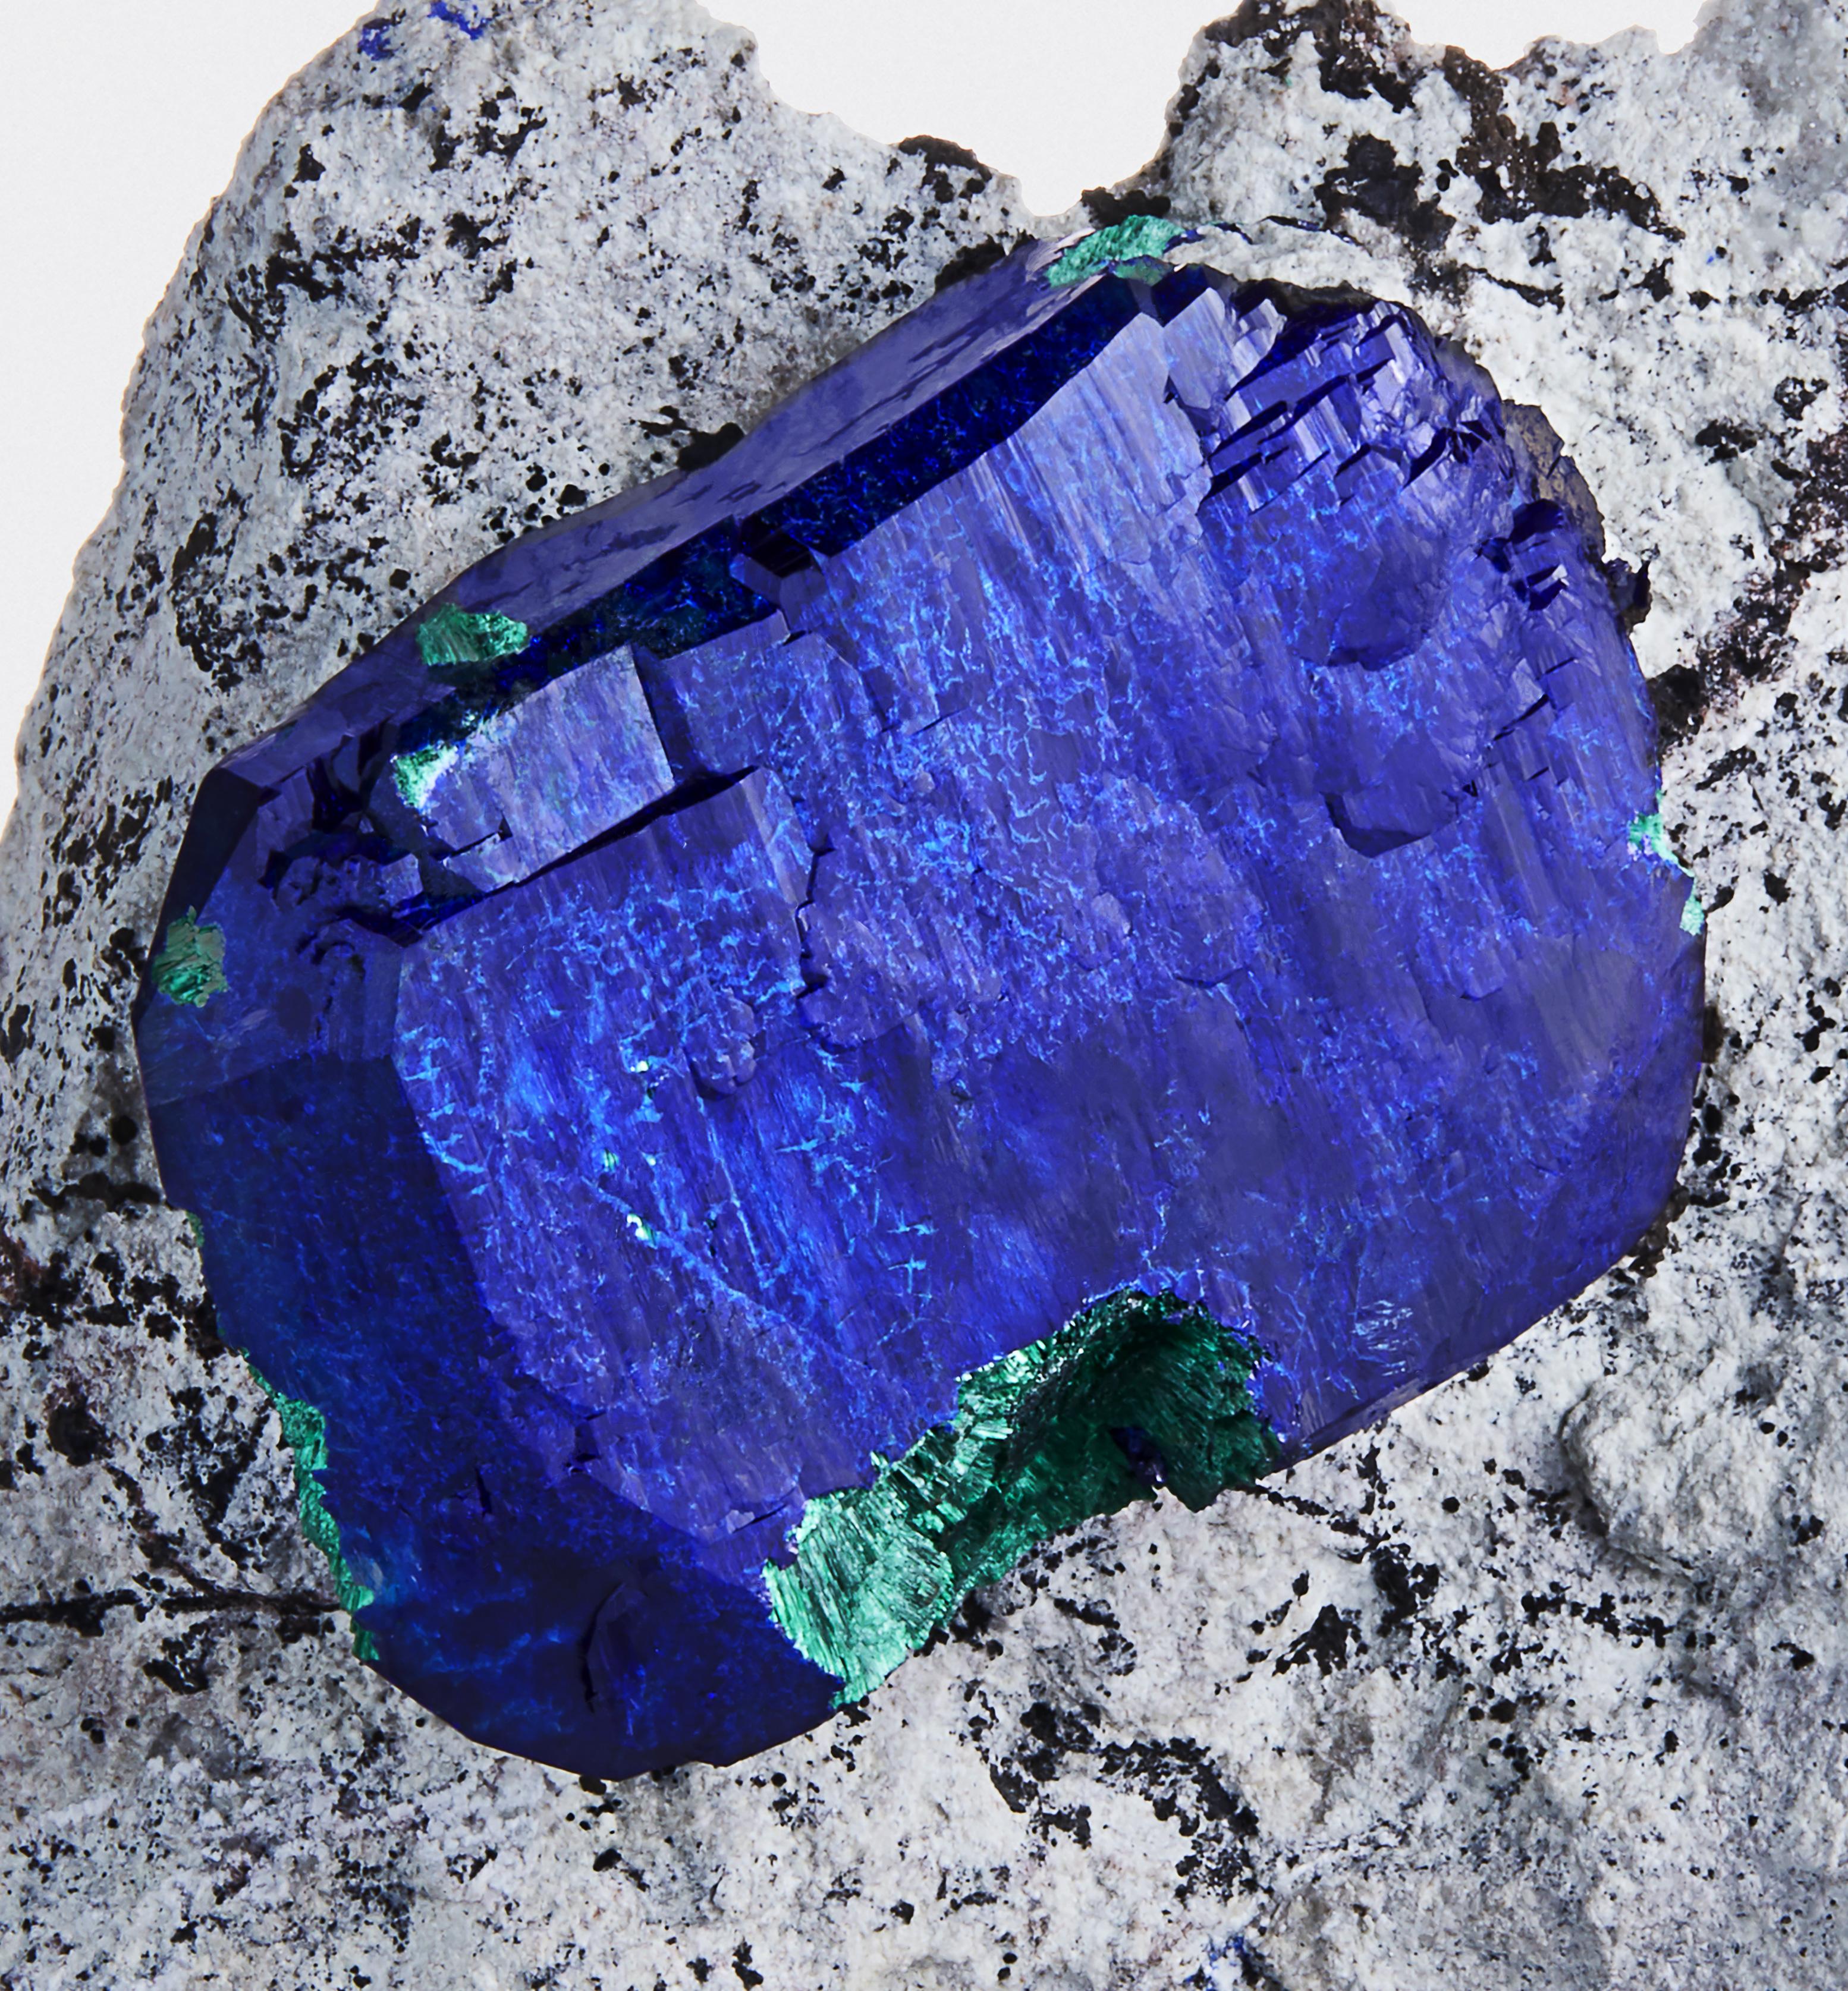 Azurite, Milpillas Mine, Cuitaca, Santa Cruz Municipality, Sonora, Mexico
Measures: 8 cm tall x 7.5 cm wide

This Azurite was found in the most important pocket, the Electric Blue Pocket. Azurites from this unique discovery exhibit a rare and